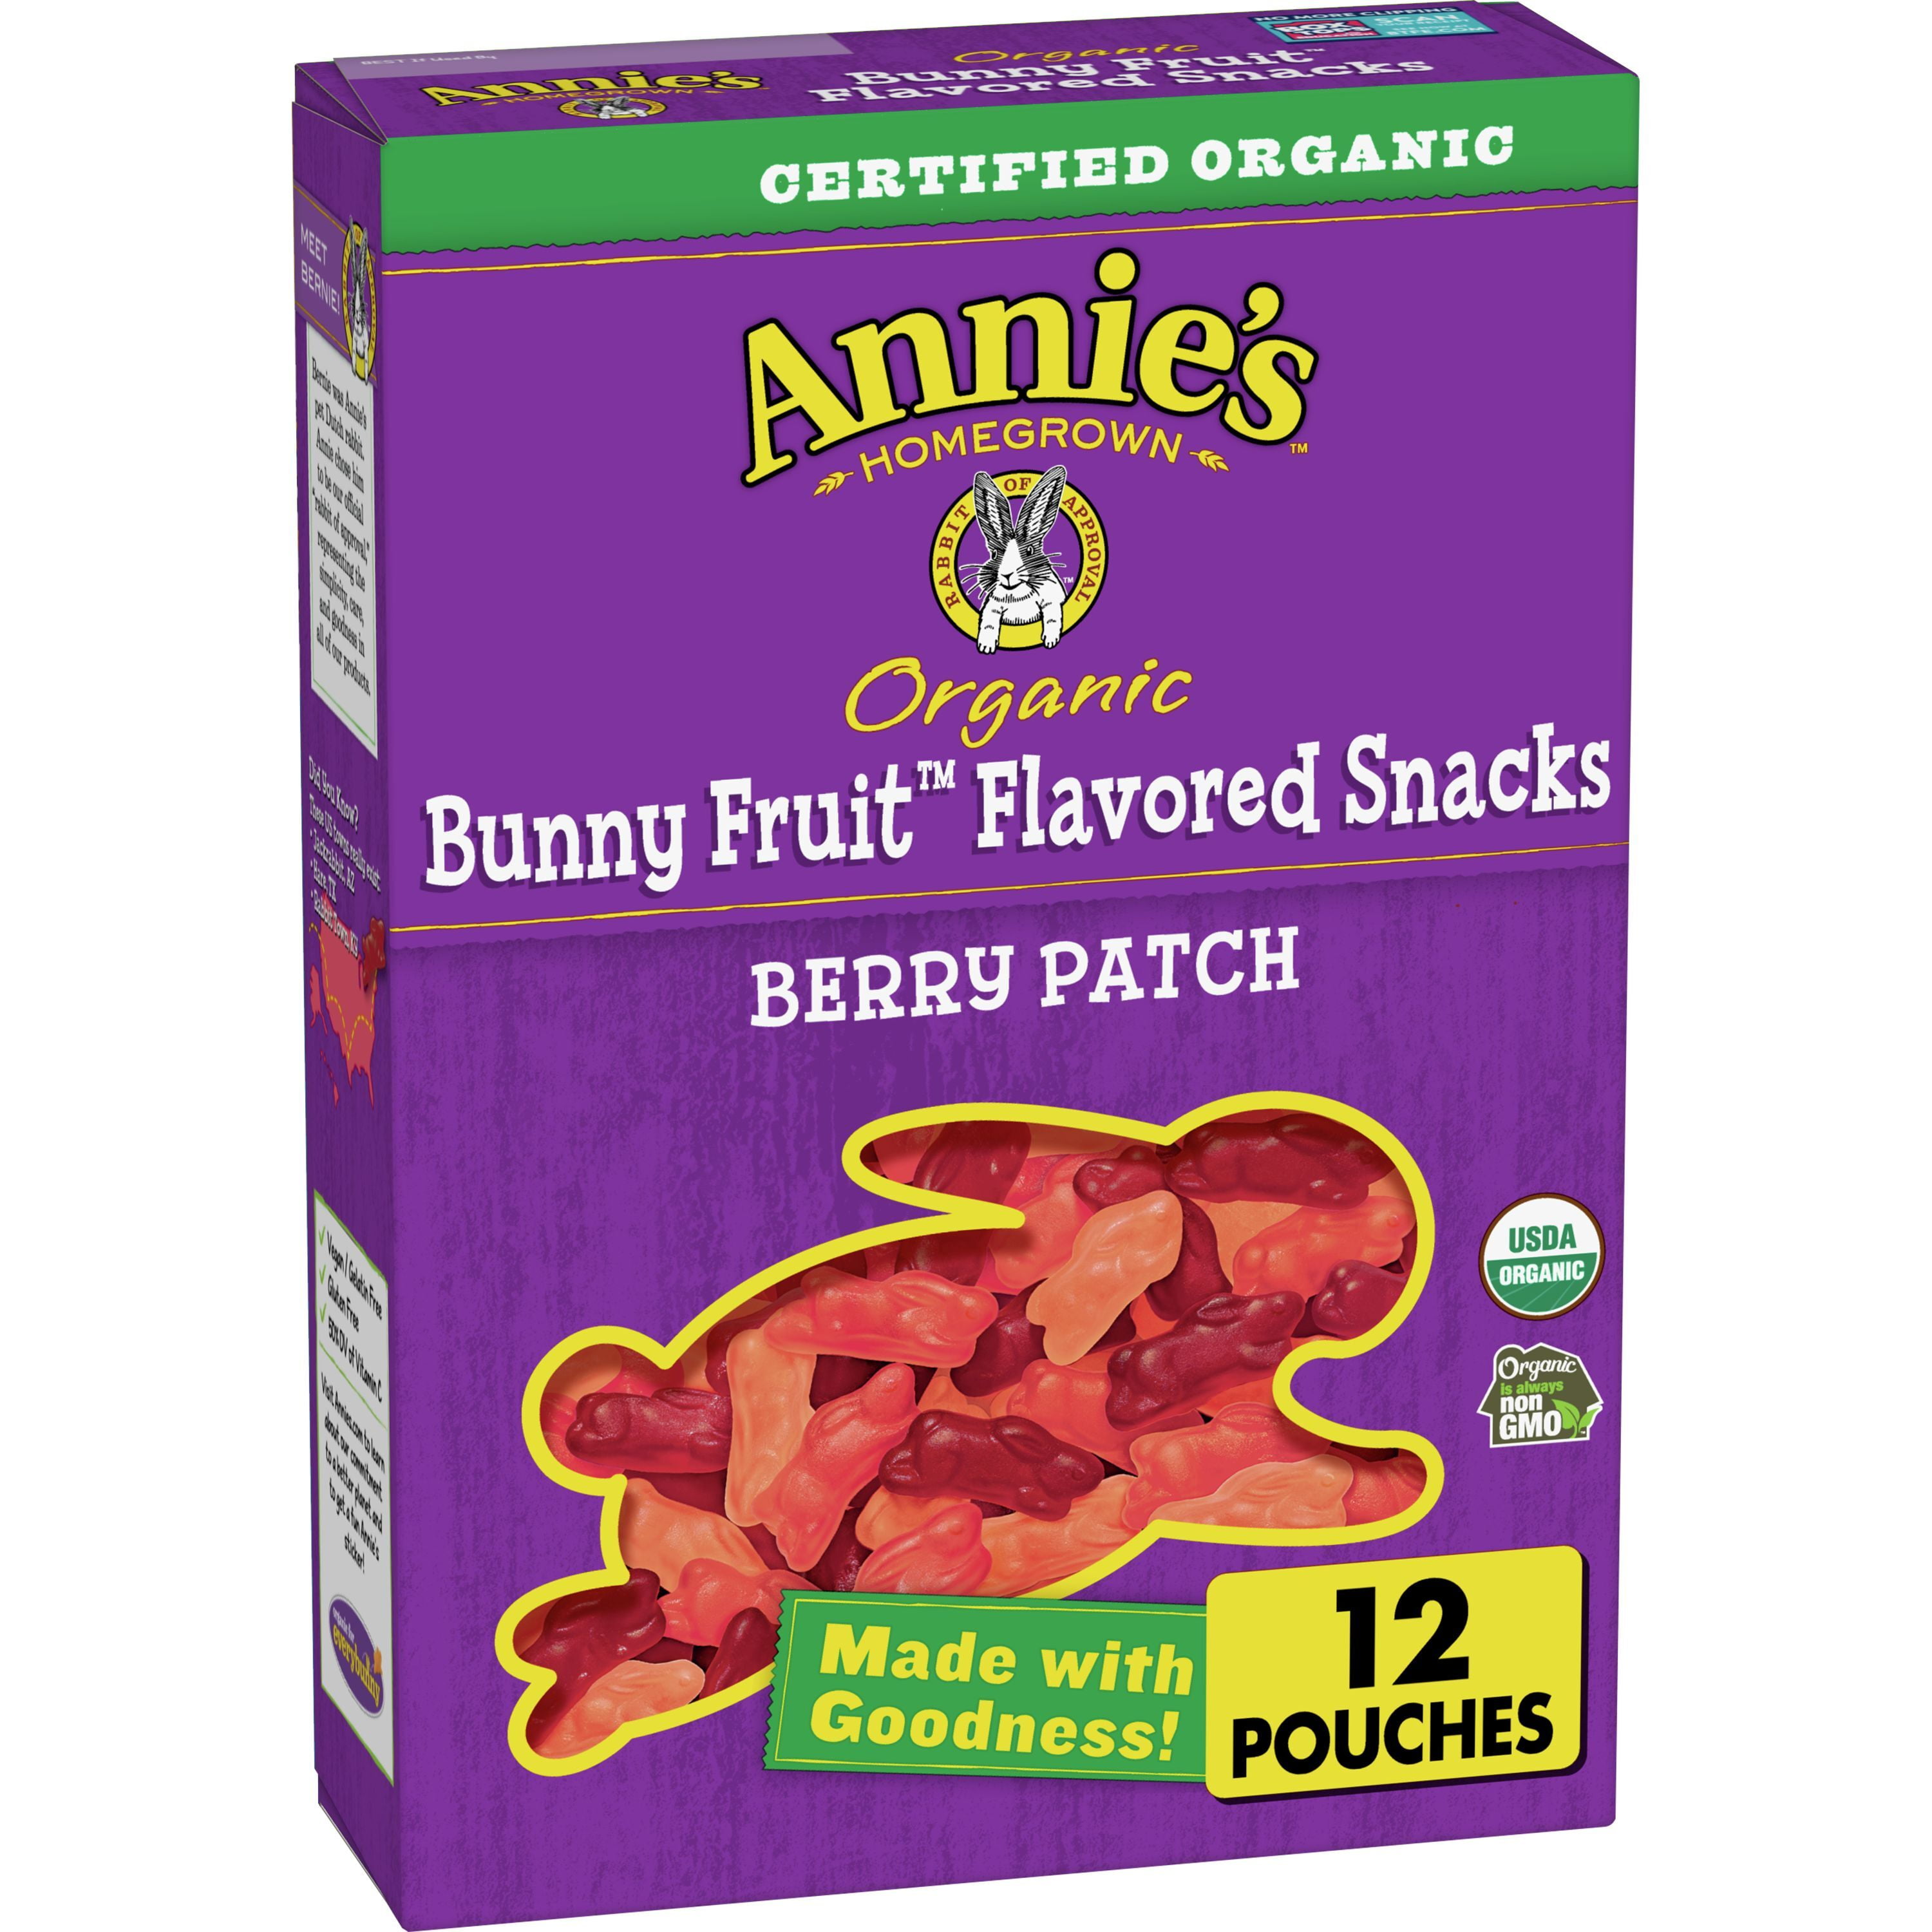 Annie's Organic Berry Patch Bunny Fruit Flavored Snacks, Gluten Free, 12 Pouches, 9.6 oz.